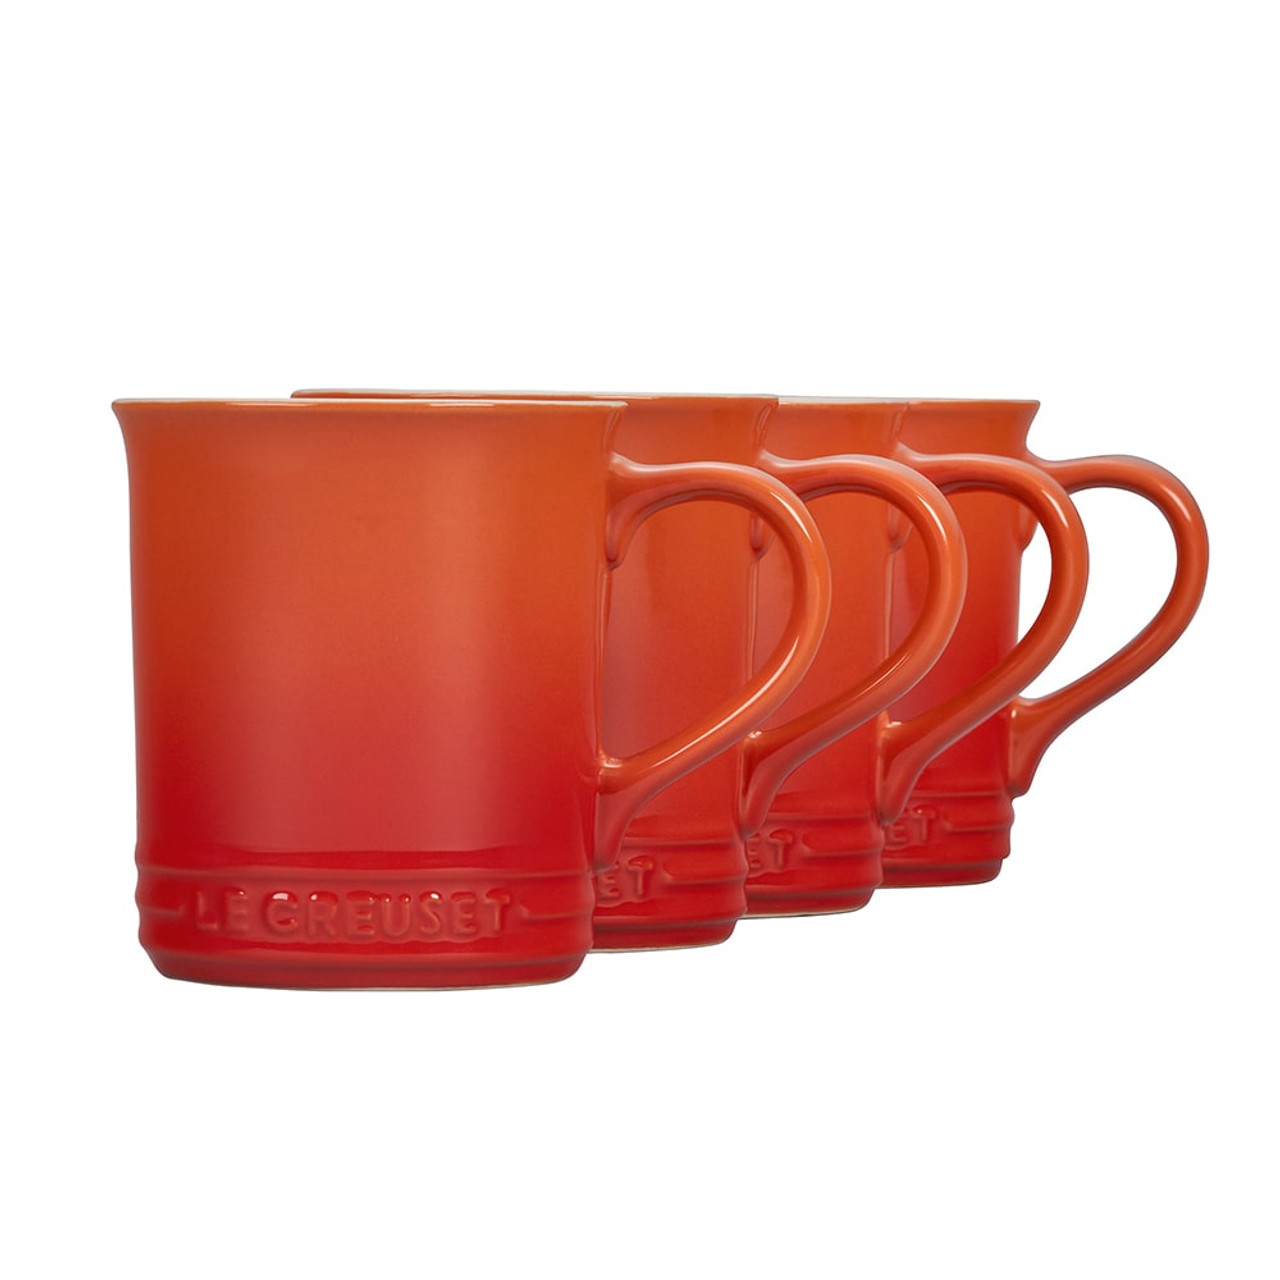 https://cdn11.bigcommerce.com/s-hccytny0od/images/stencil/1280x1280/products/3138/11174/le-creuset-mugs-flame-2__60103.1580901293.jpg?c=2?imbypass=on